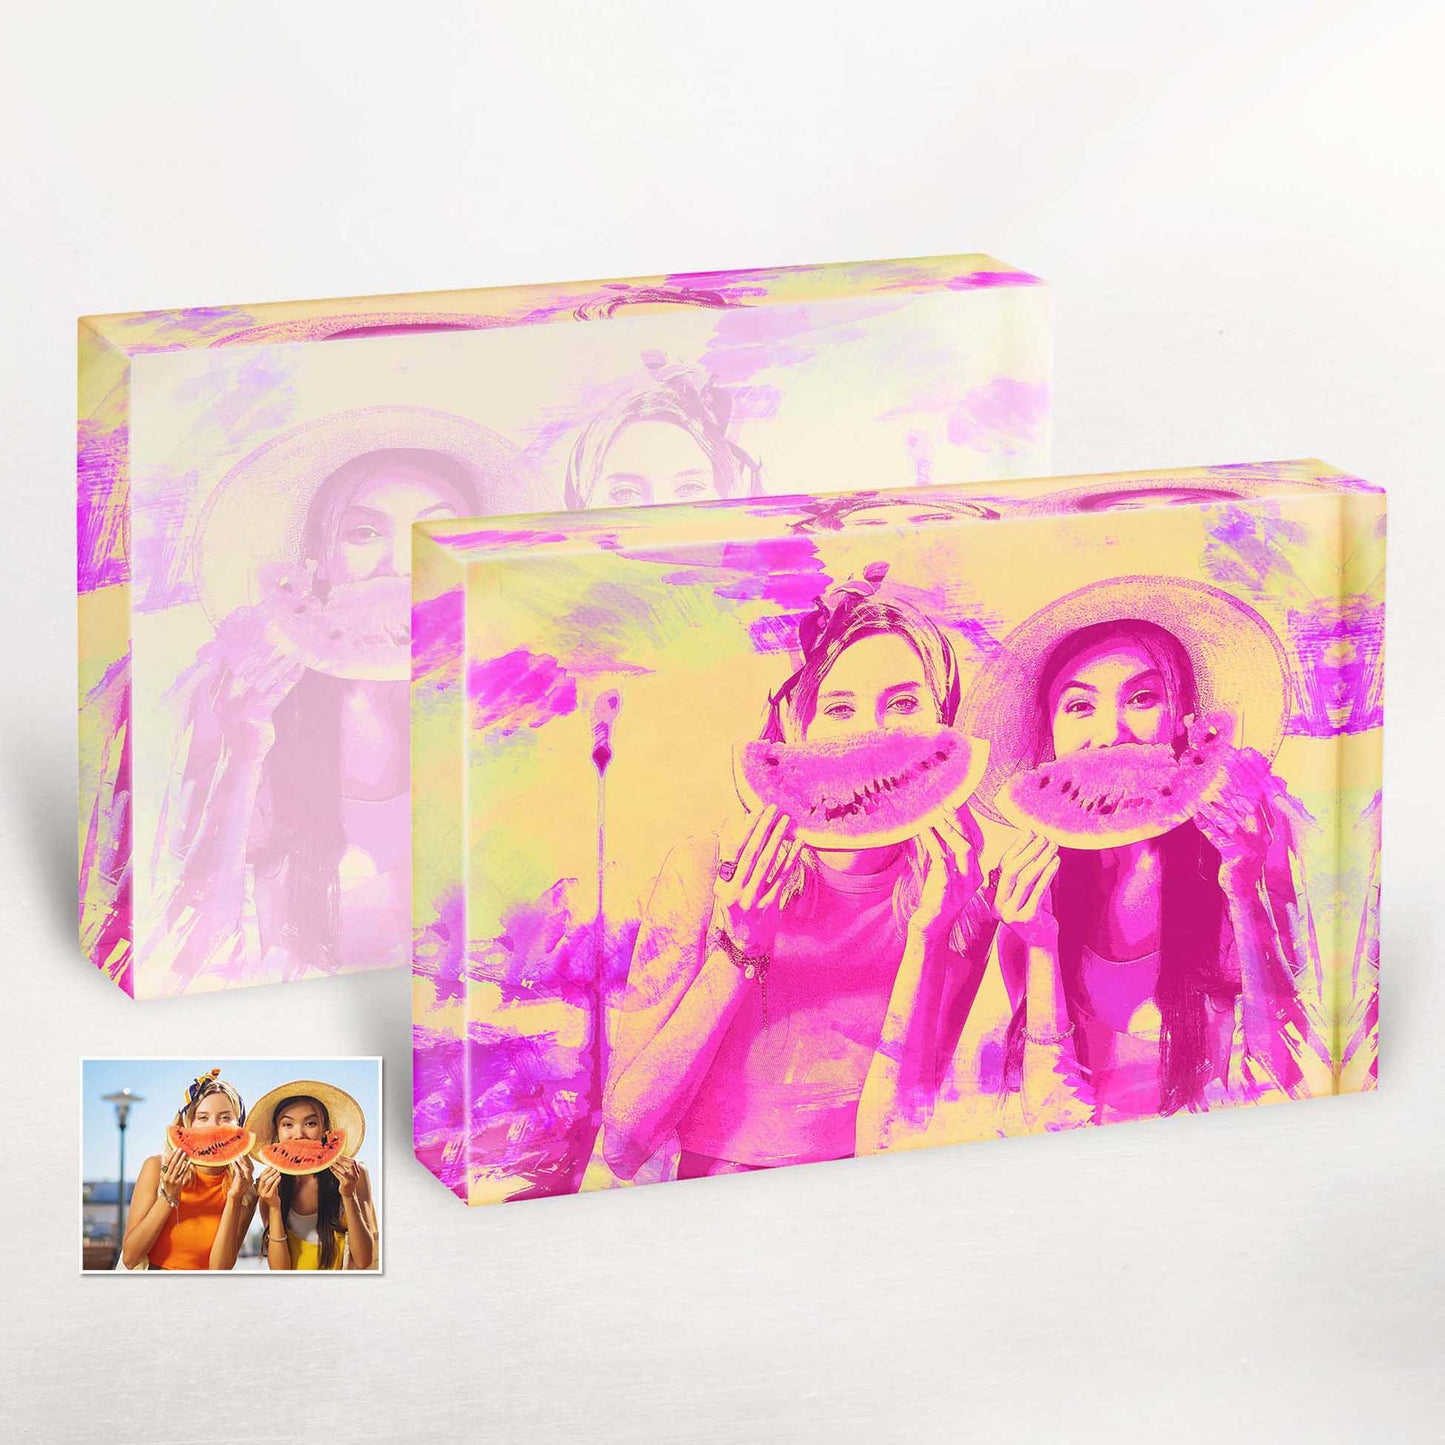 Our Personalised Pink and Yellow Watercolor Acrylic Block Photo is a burst of colorful vibrancy. The cool and refreshing hues blend seamlessly, creating an exciting visual experience that makes it an ideal anniversary or birthday gift.